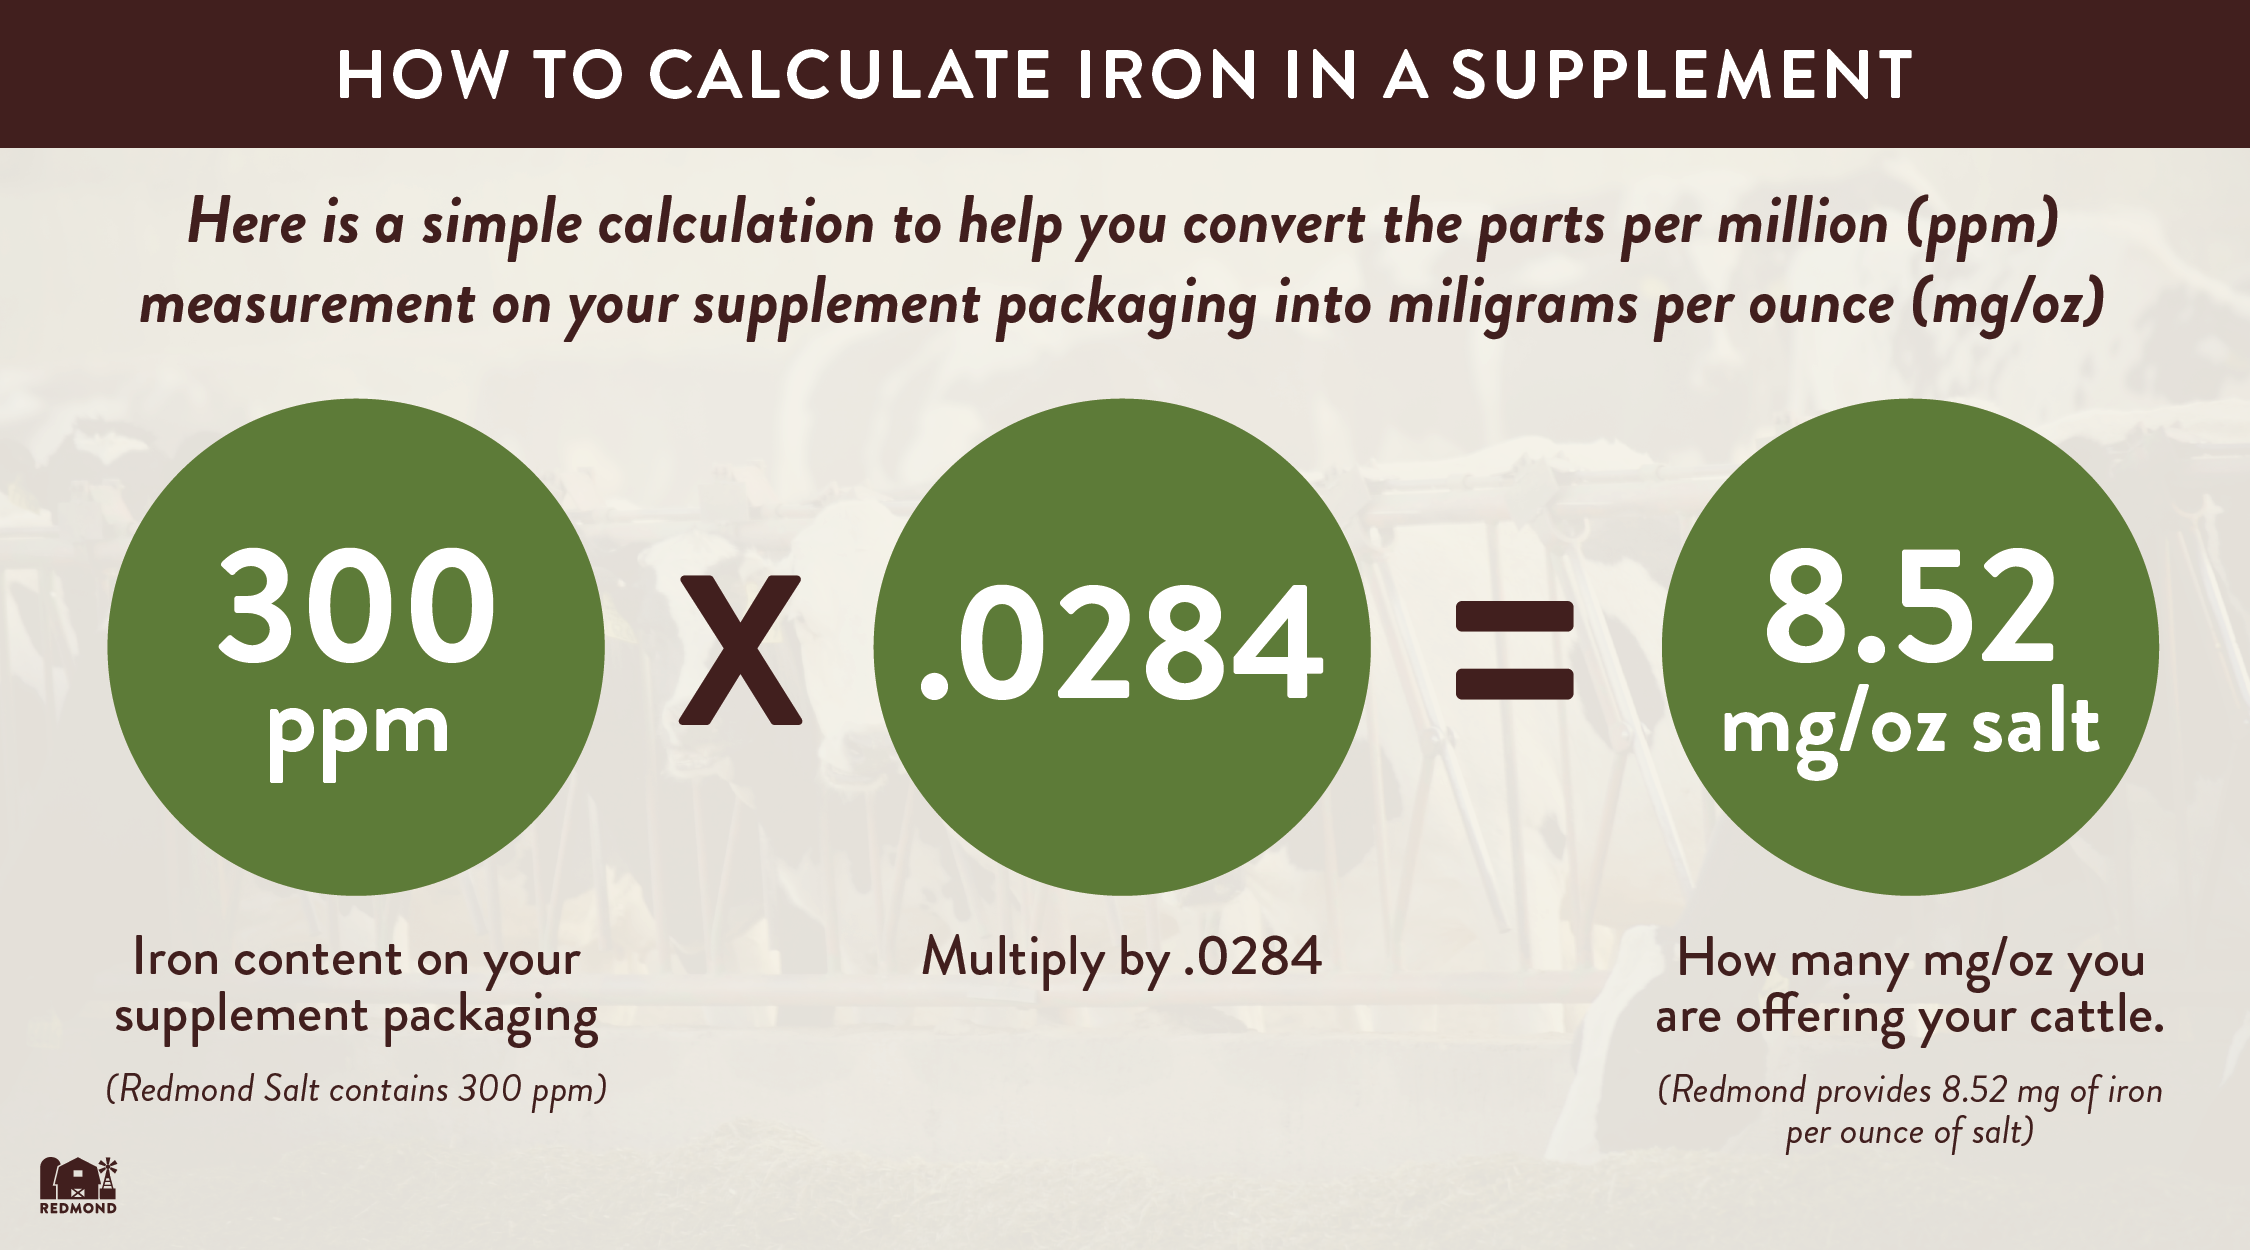 How much iron do cattle need